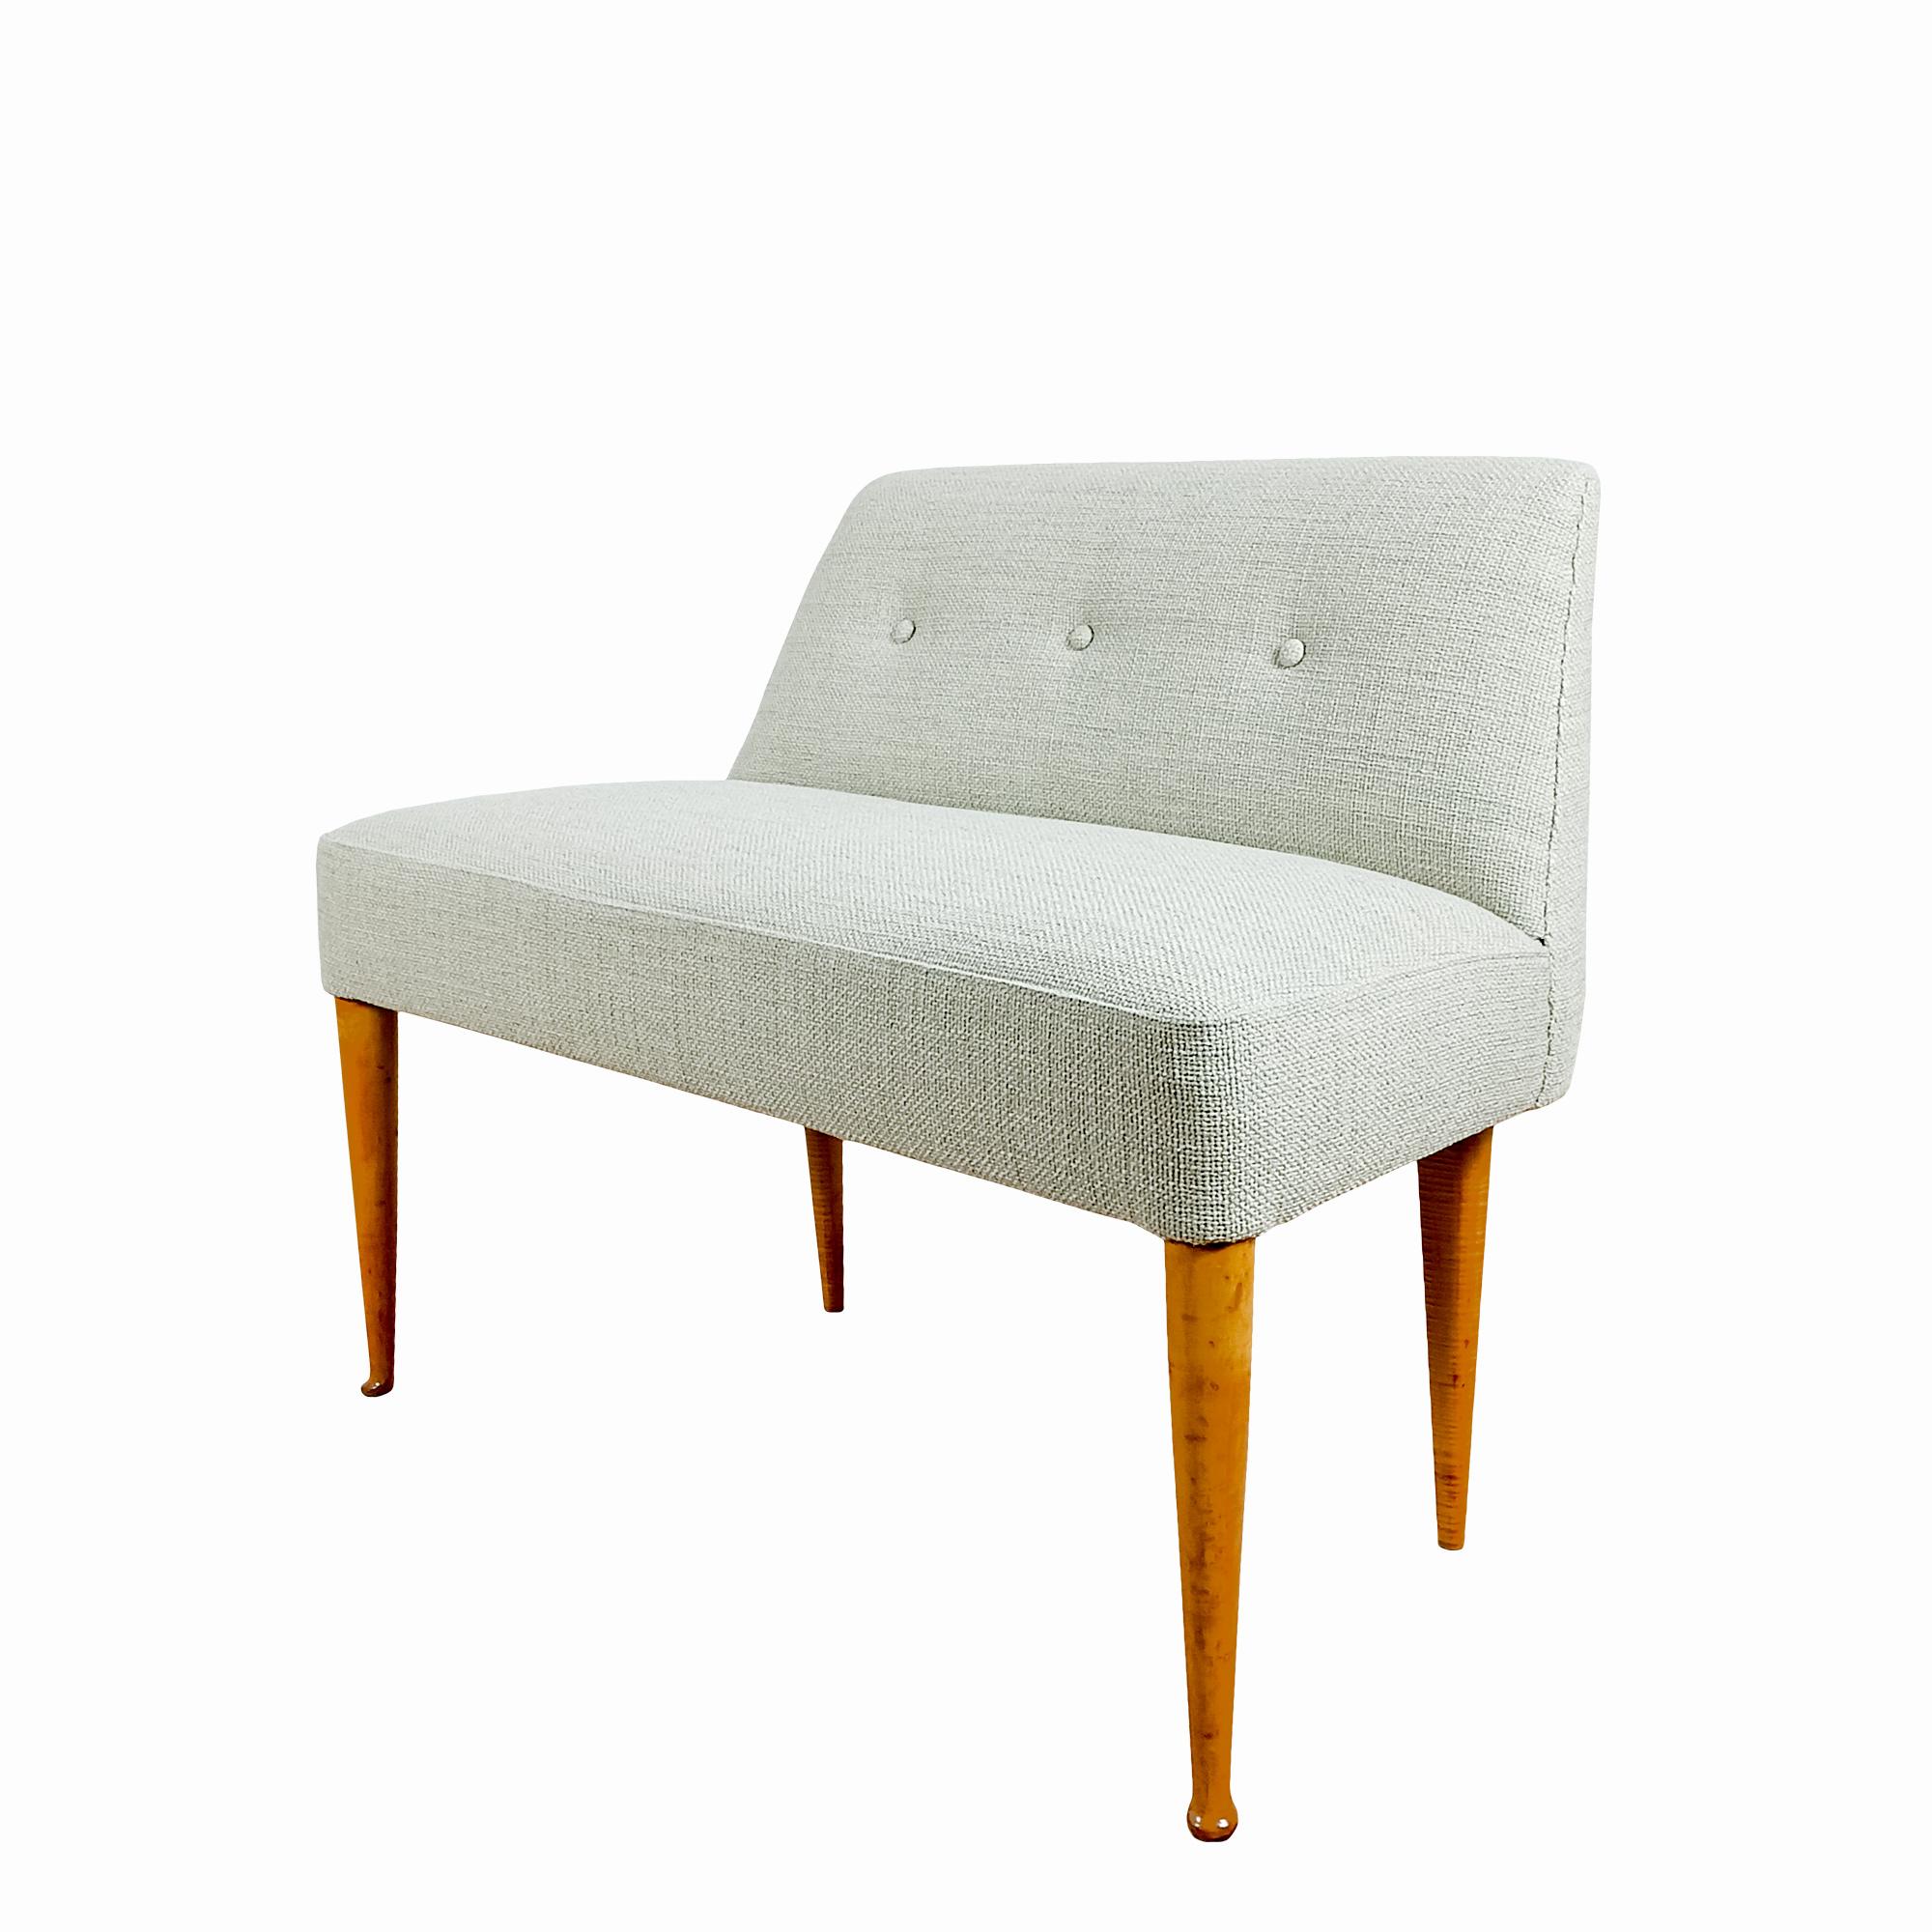 Mid-Century Modern Small MId-Century Modern Bench in Greige Chenille Fabric - Italy, Early 1950s For Sale